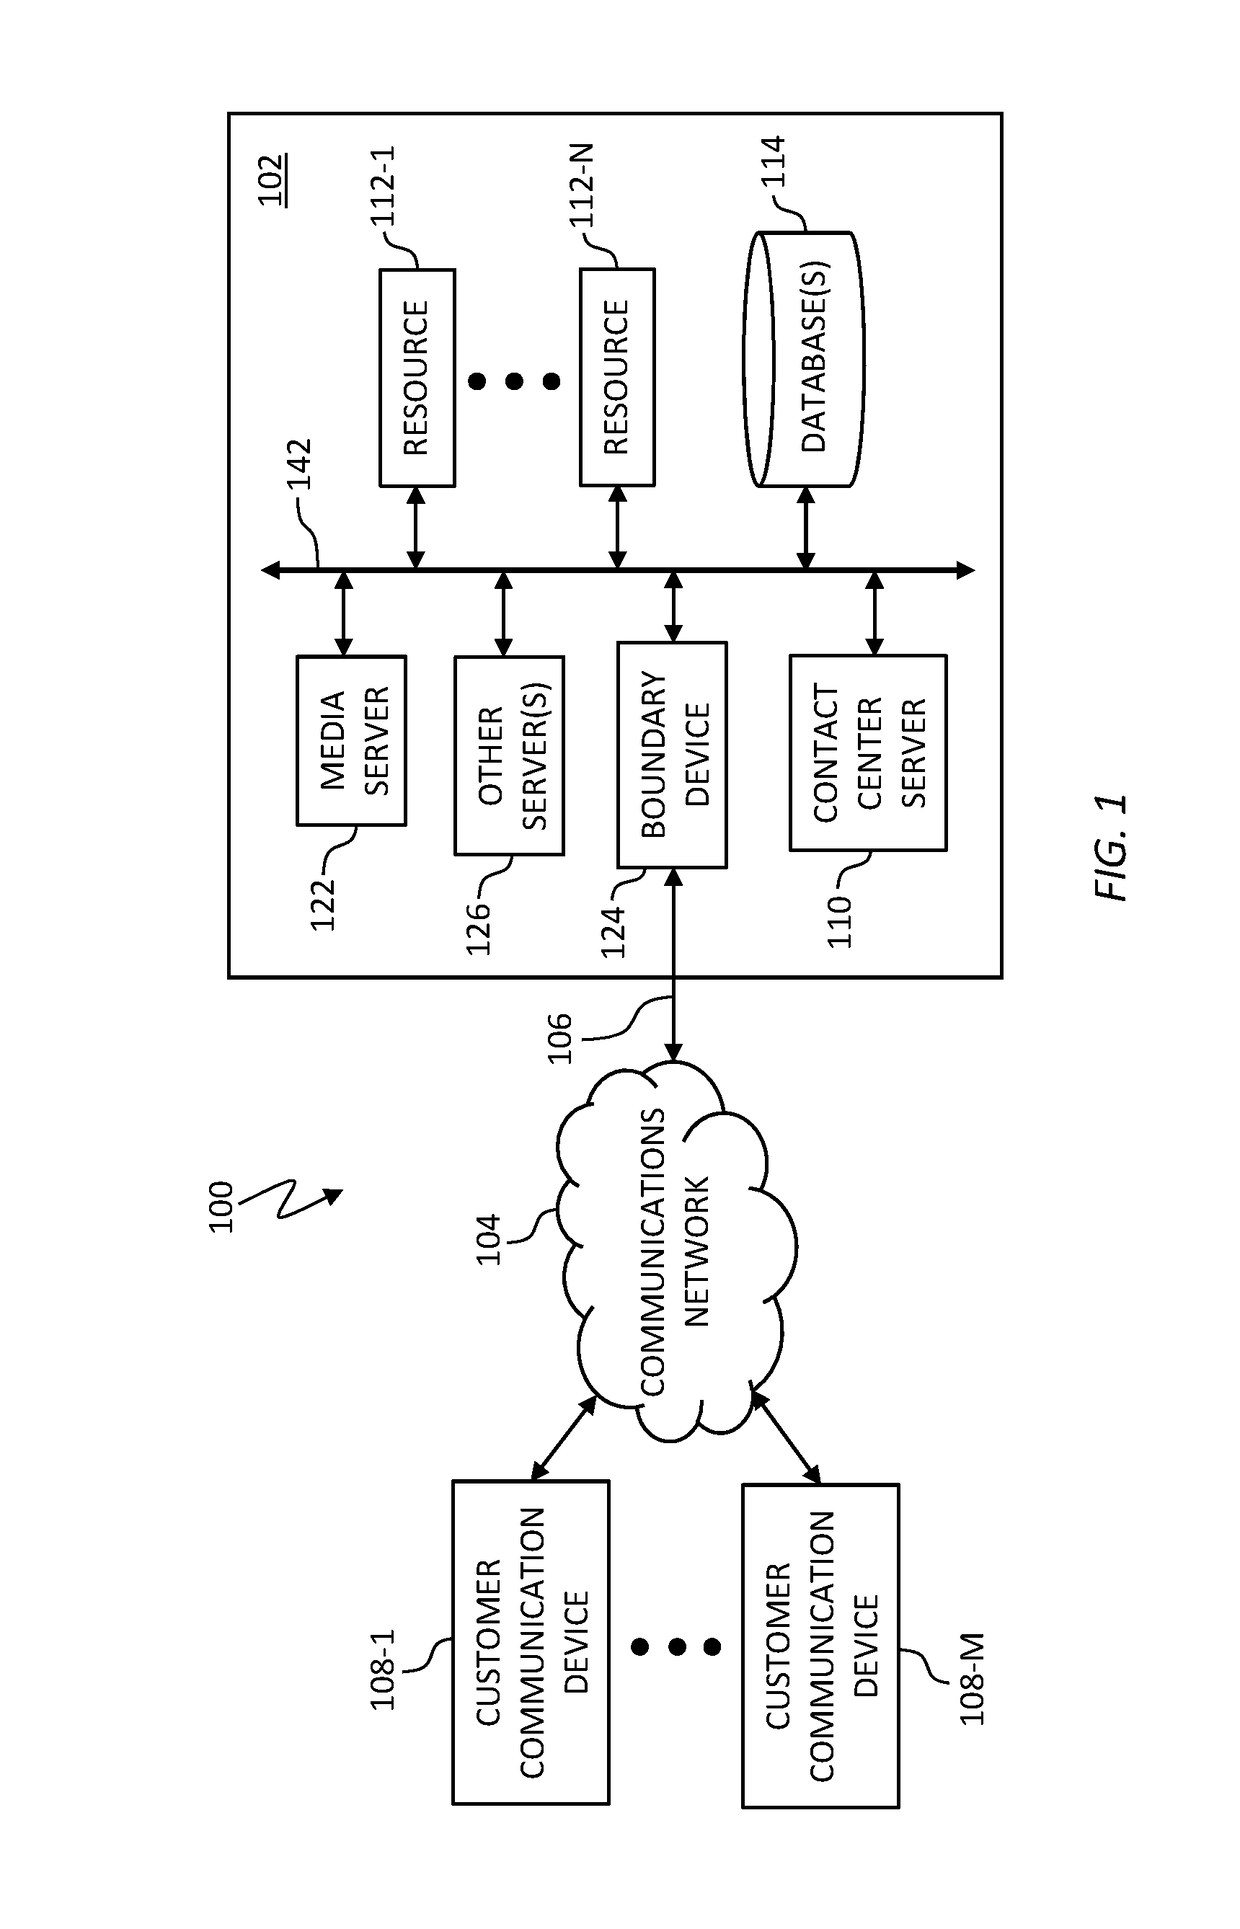 Systems and methods for optimal scheduling of resources in a contact center